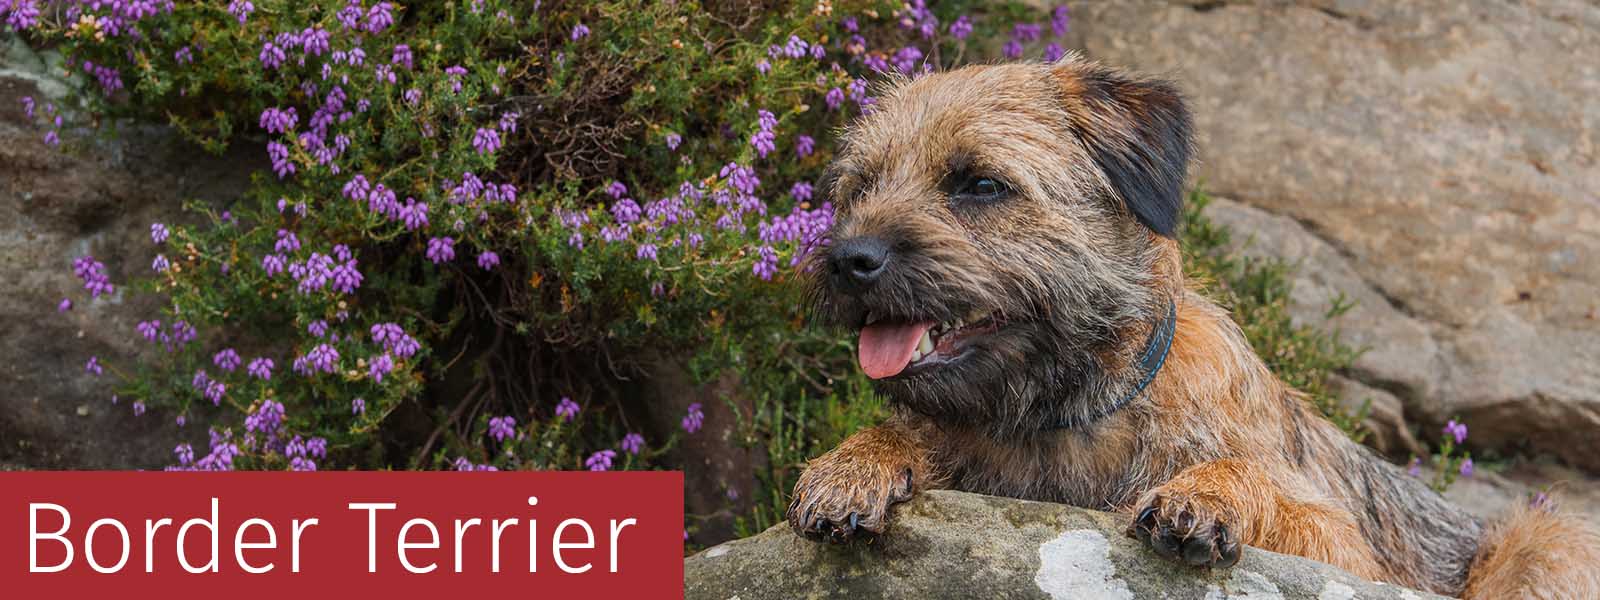 Border Terrier Gifts